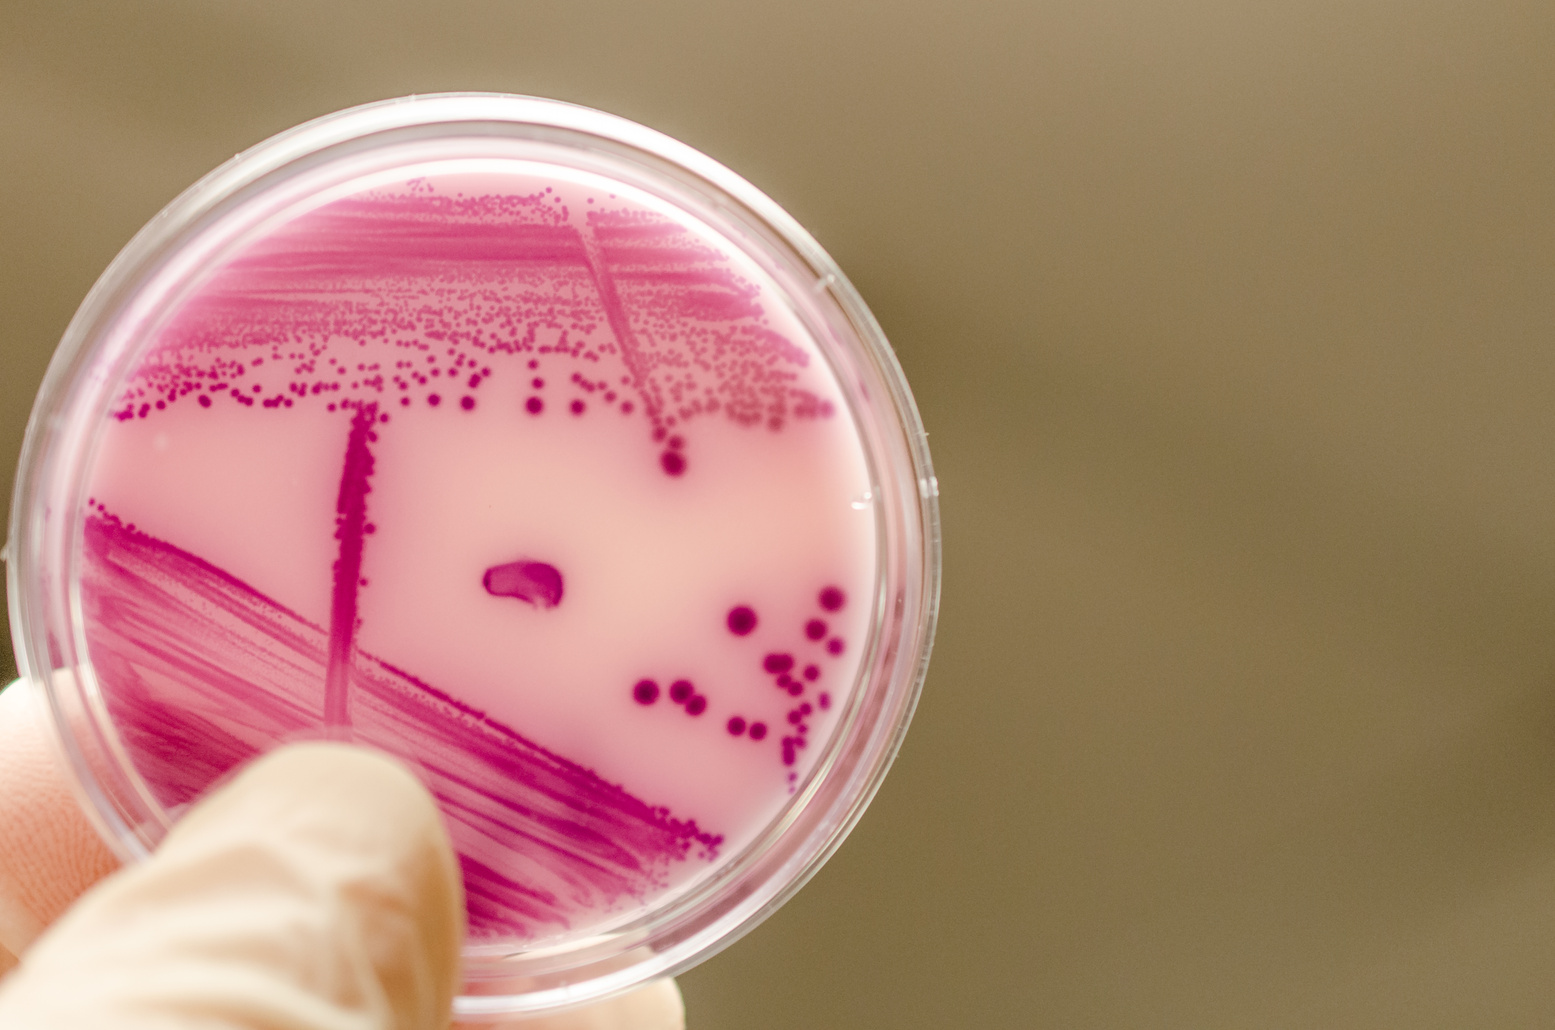 Bacterial culture plate